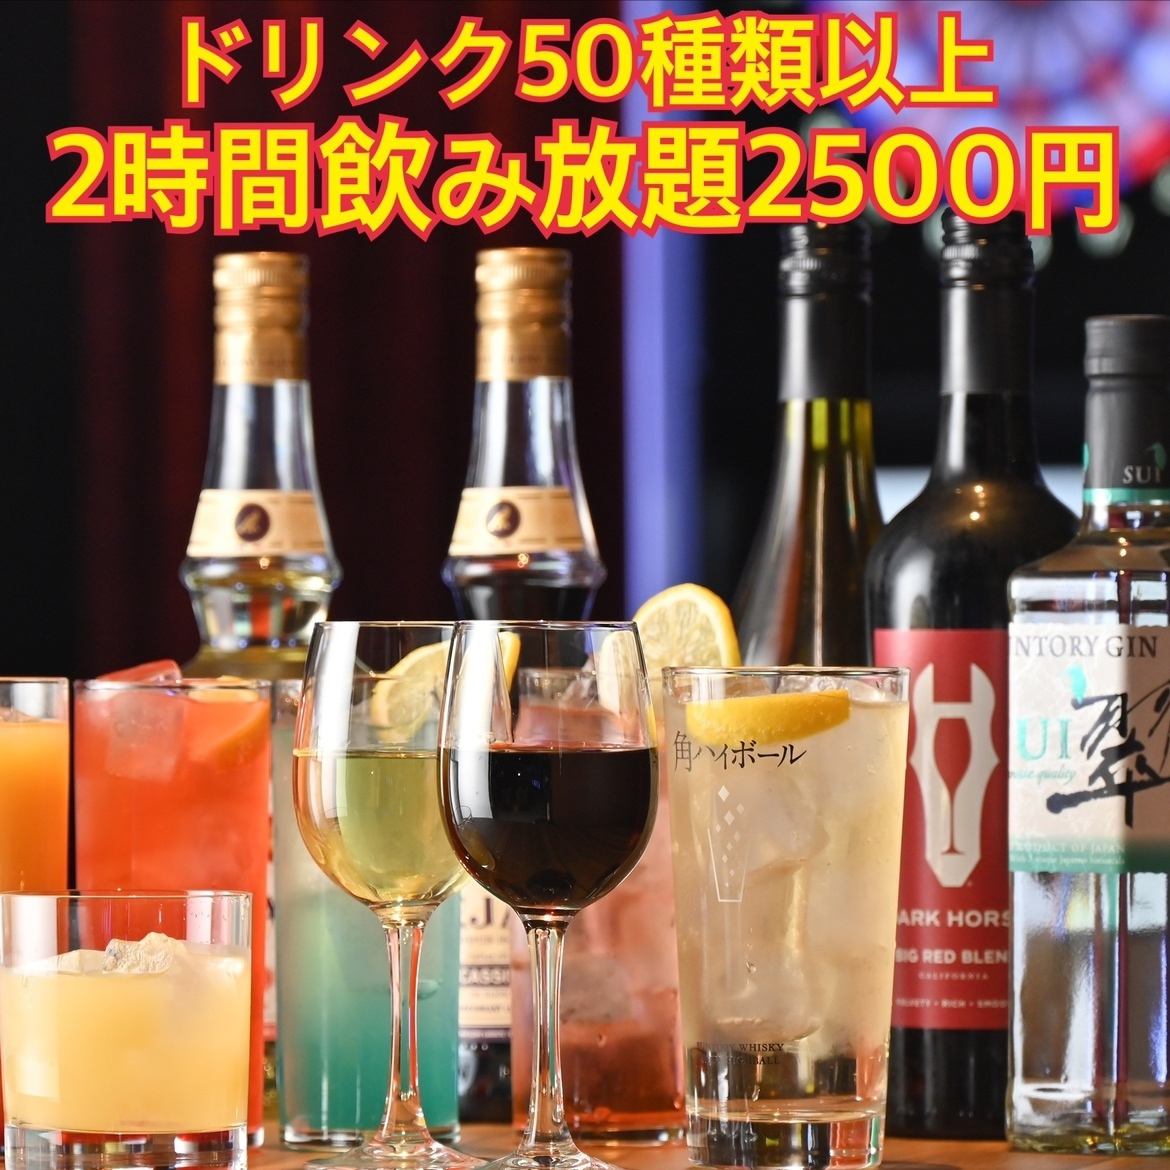 2 hours all-you-can-drink from 2,500 yen★Please use it for your second or third party!